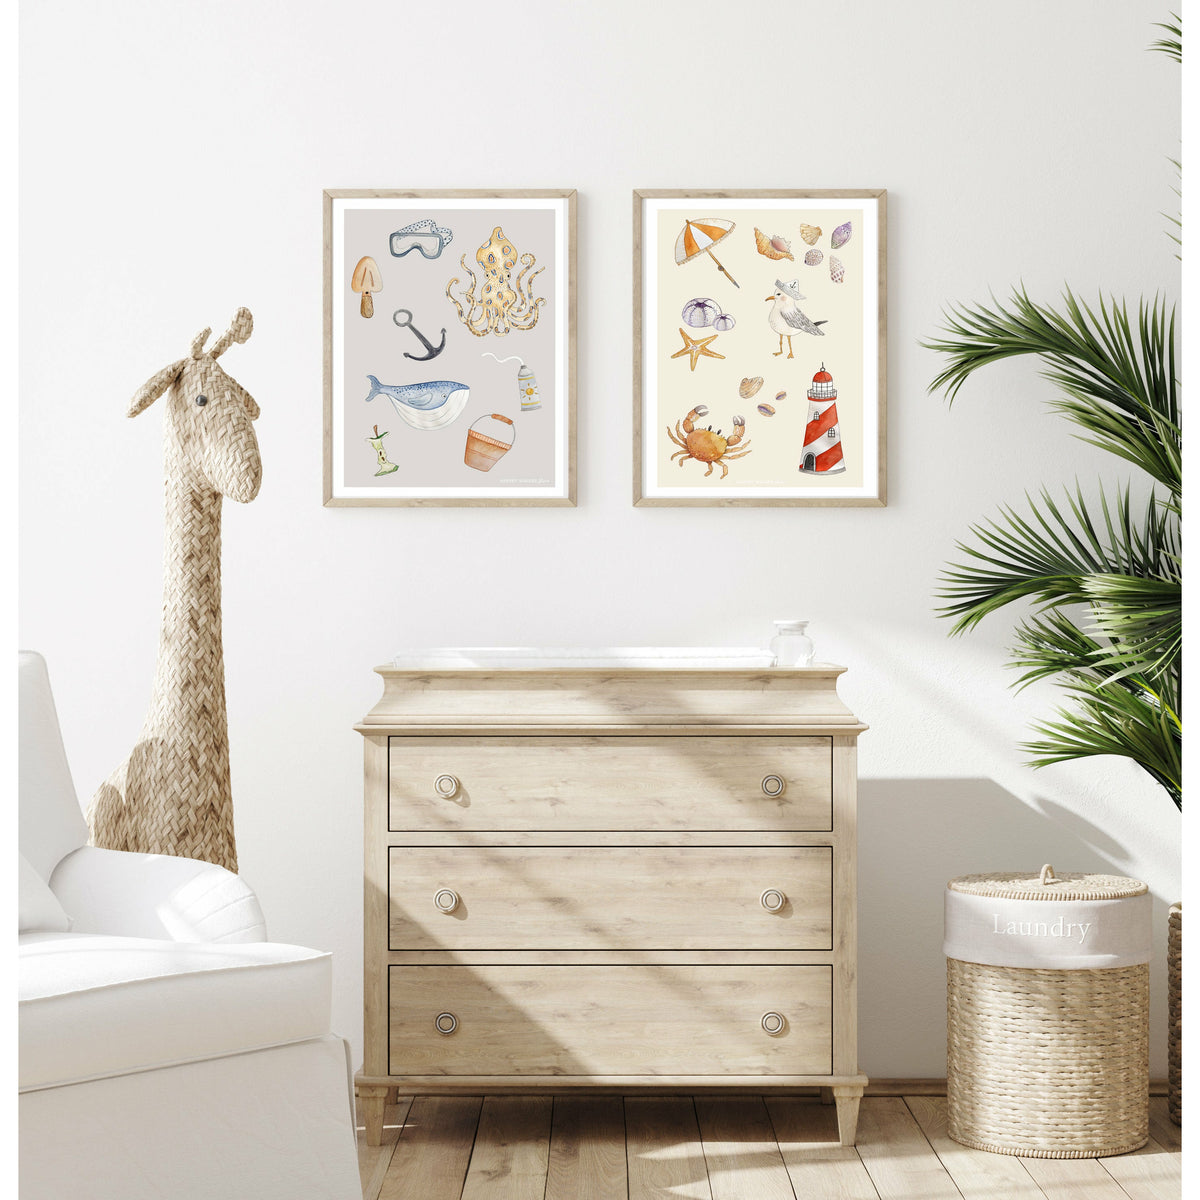 Mix and match kids artwork. Fine art prints that are gender neutral and compliment a modern coastal home and soft pallete